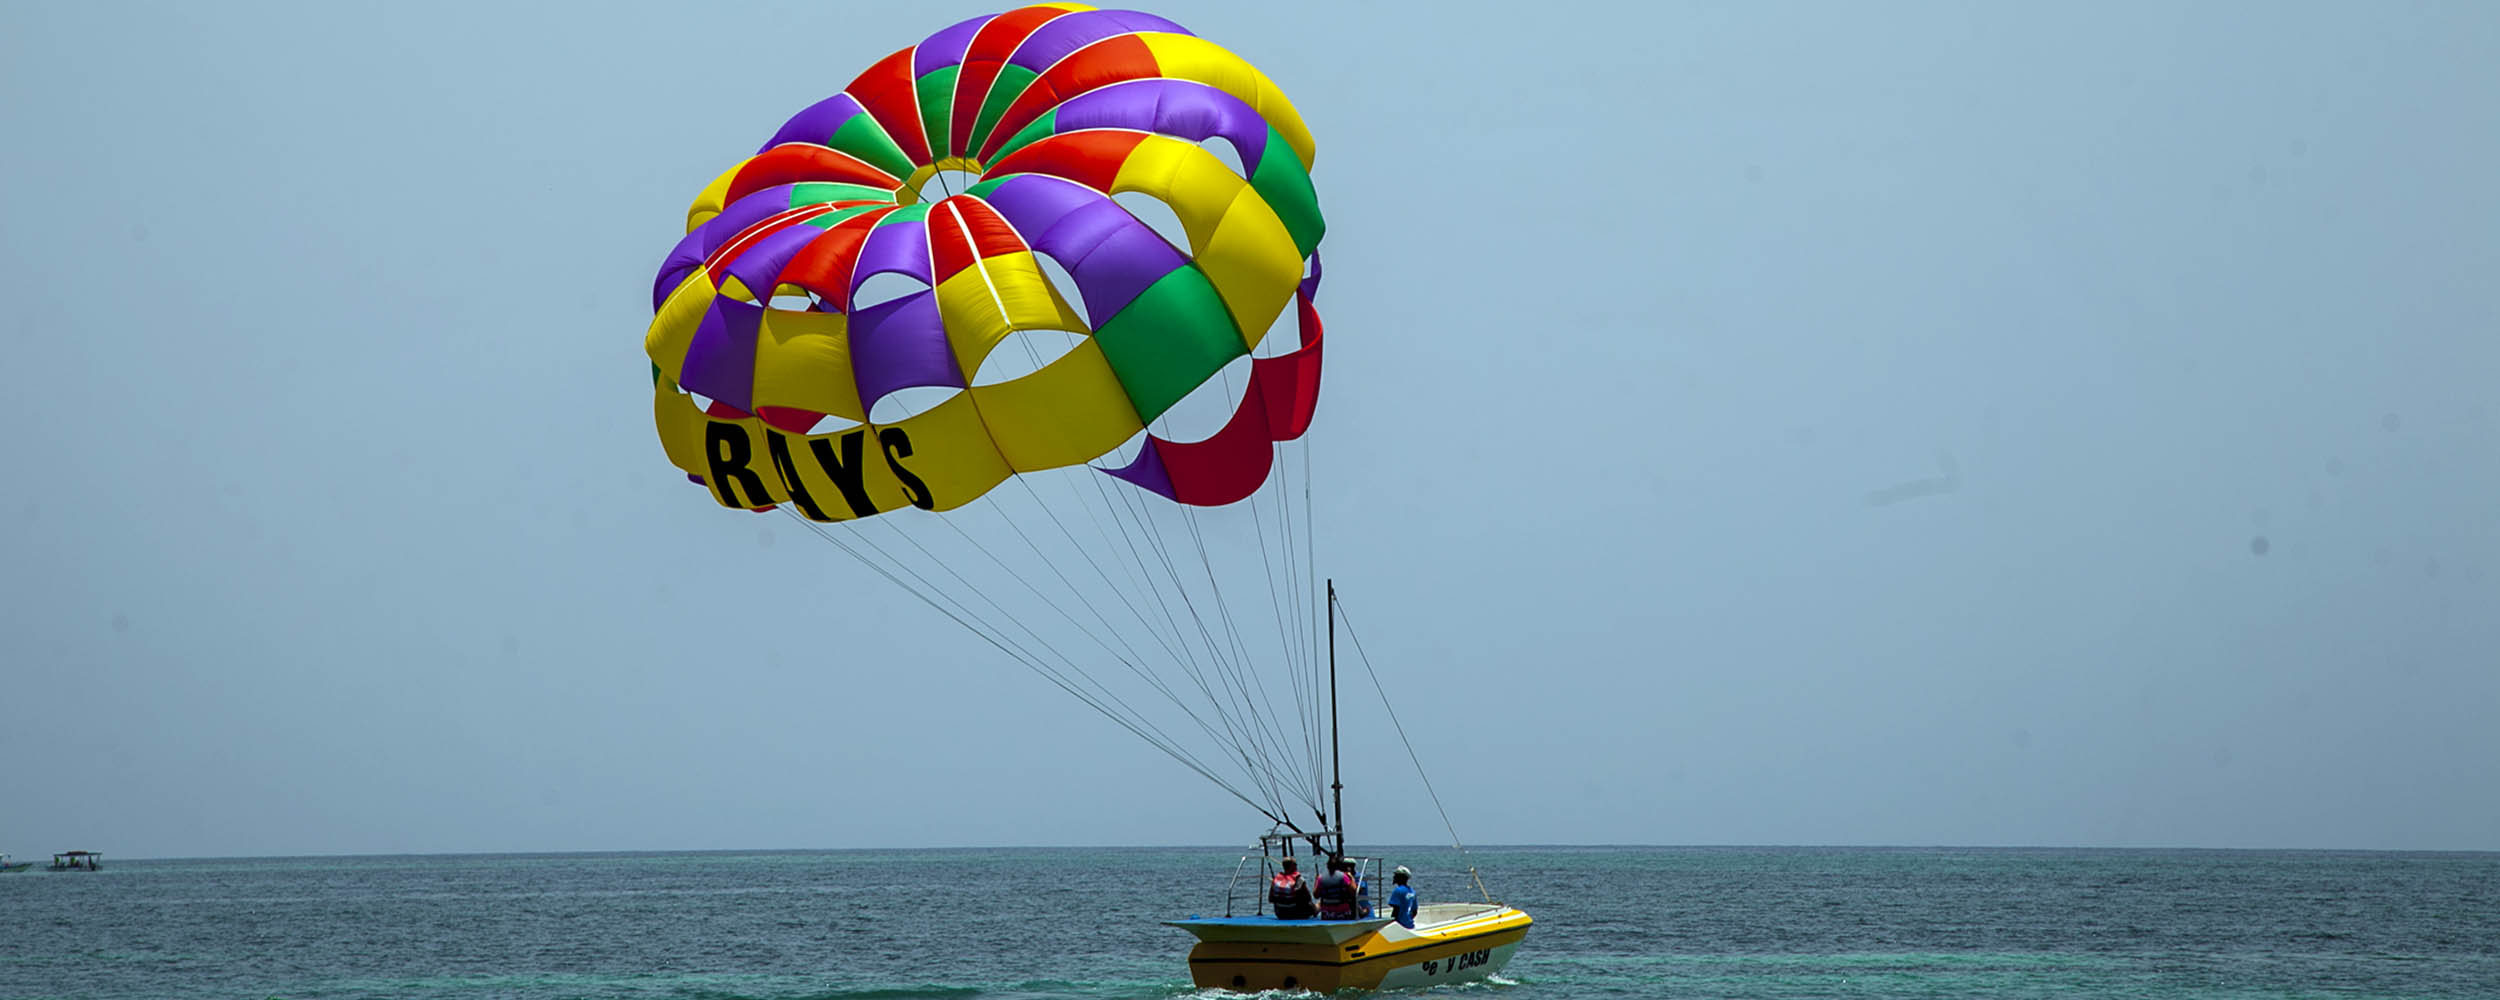 Ray's Water Sports - Fly With Ray's - Negril Beach, Negril Jamaica